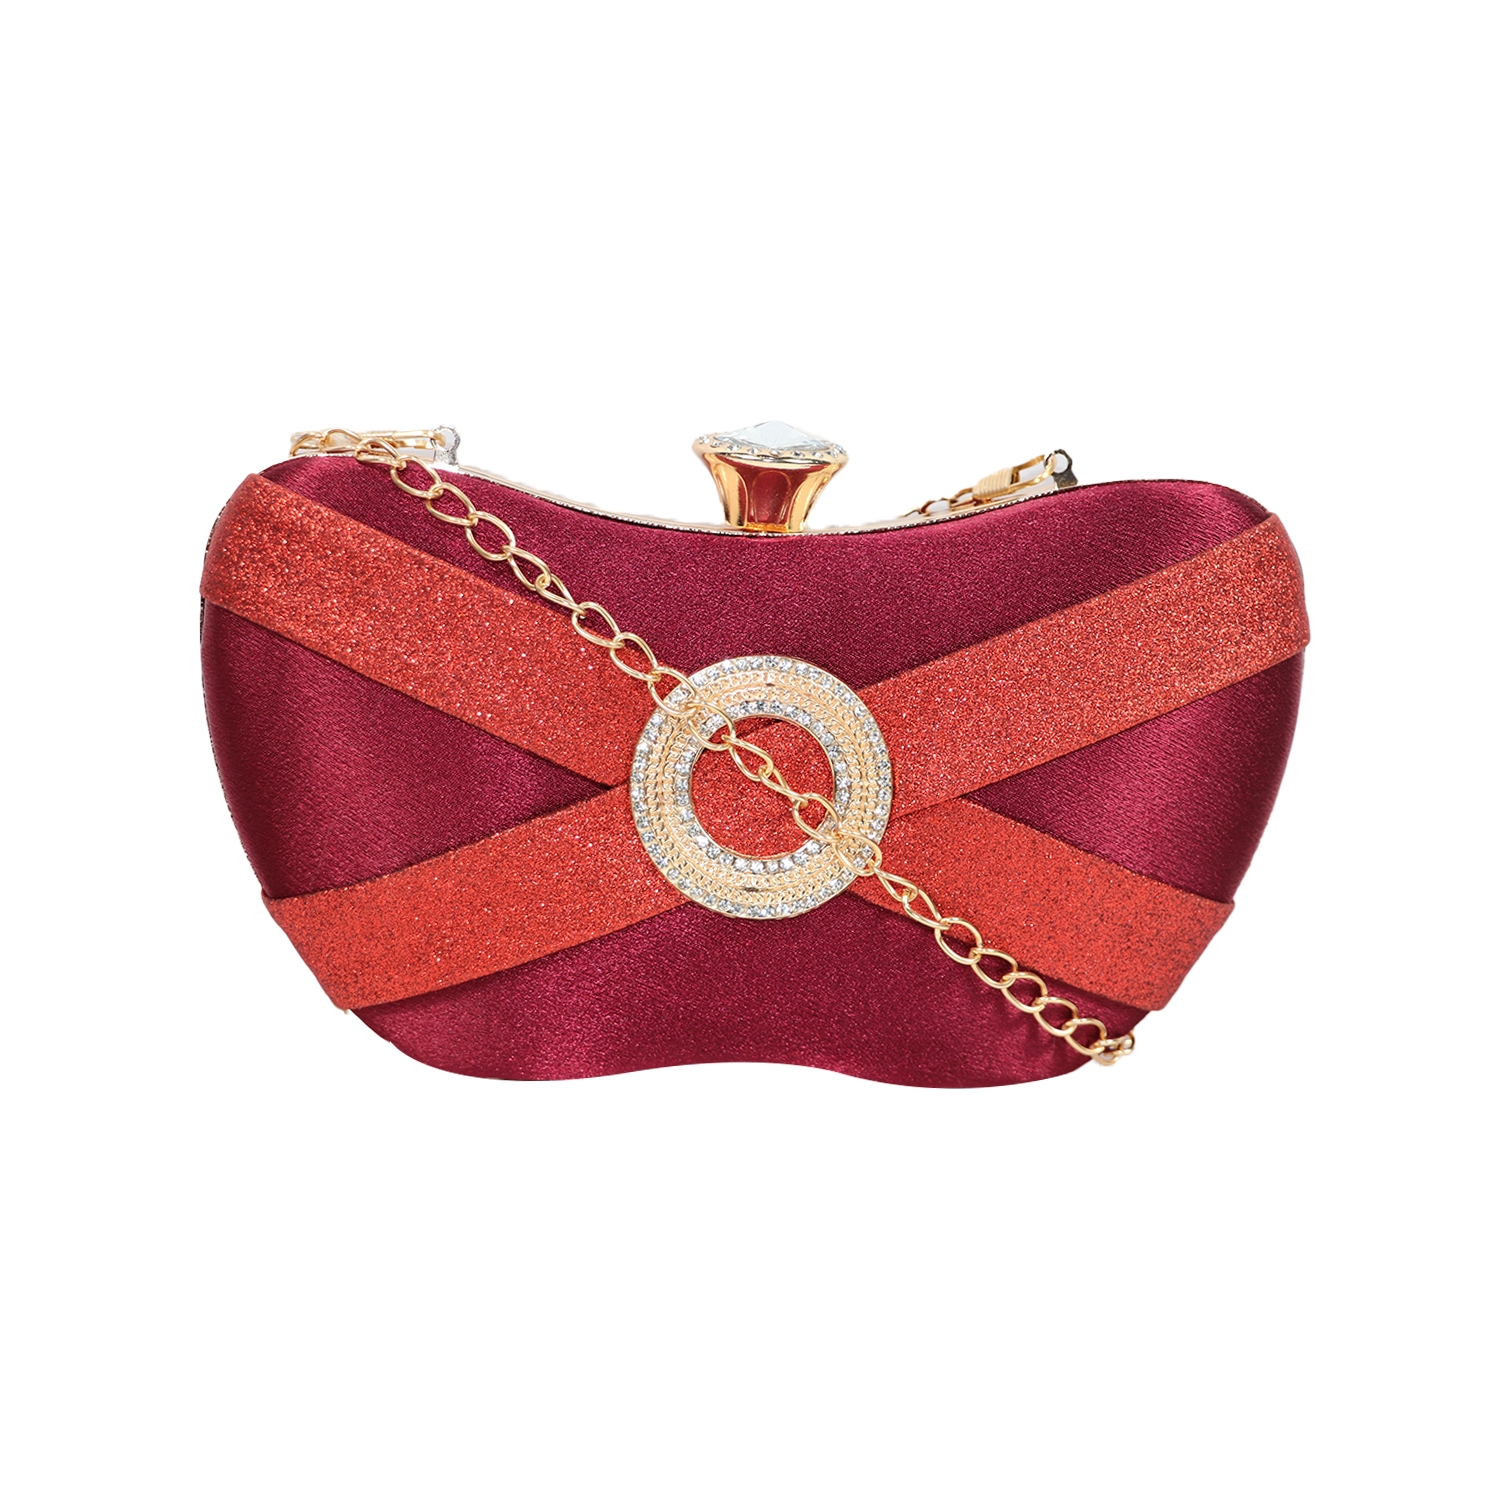 EMM | Classy Party Girl's Red Clutch 